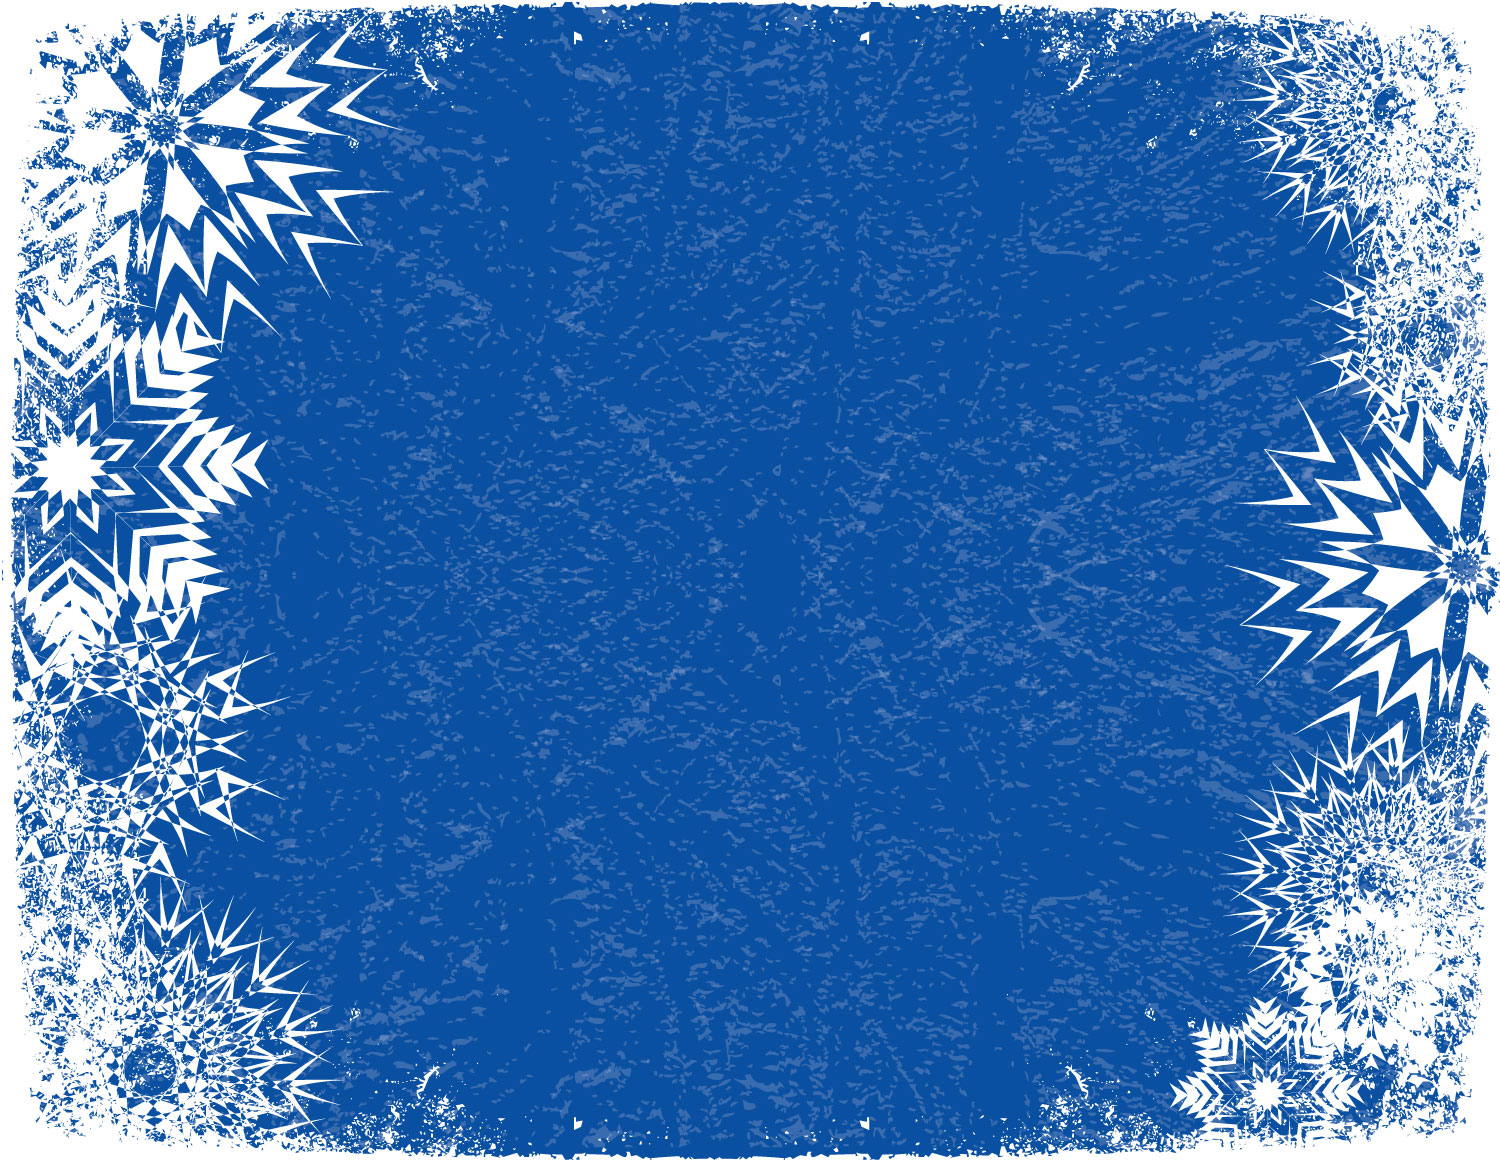 Abstract Blue Holiday Free PPT Backgrounds for your PowerPoint